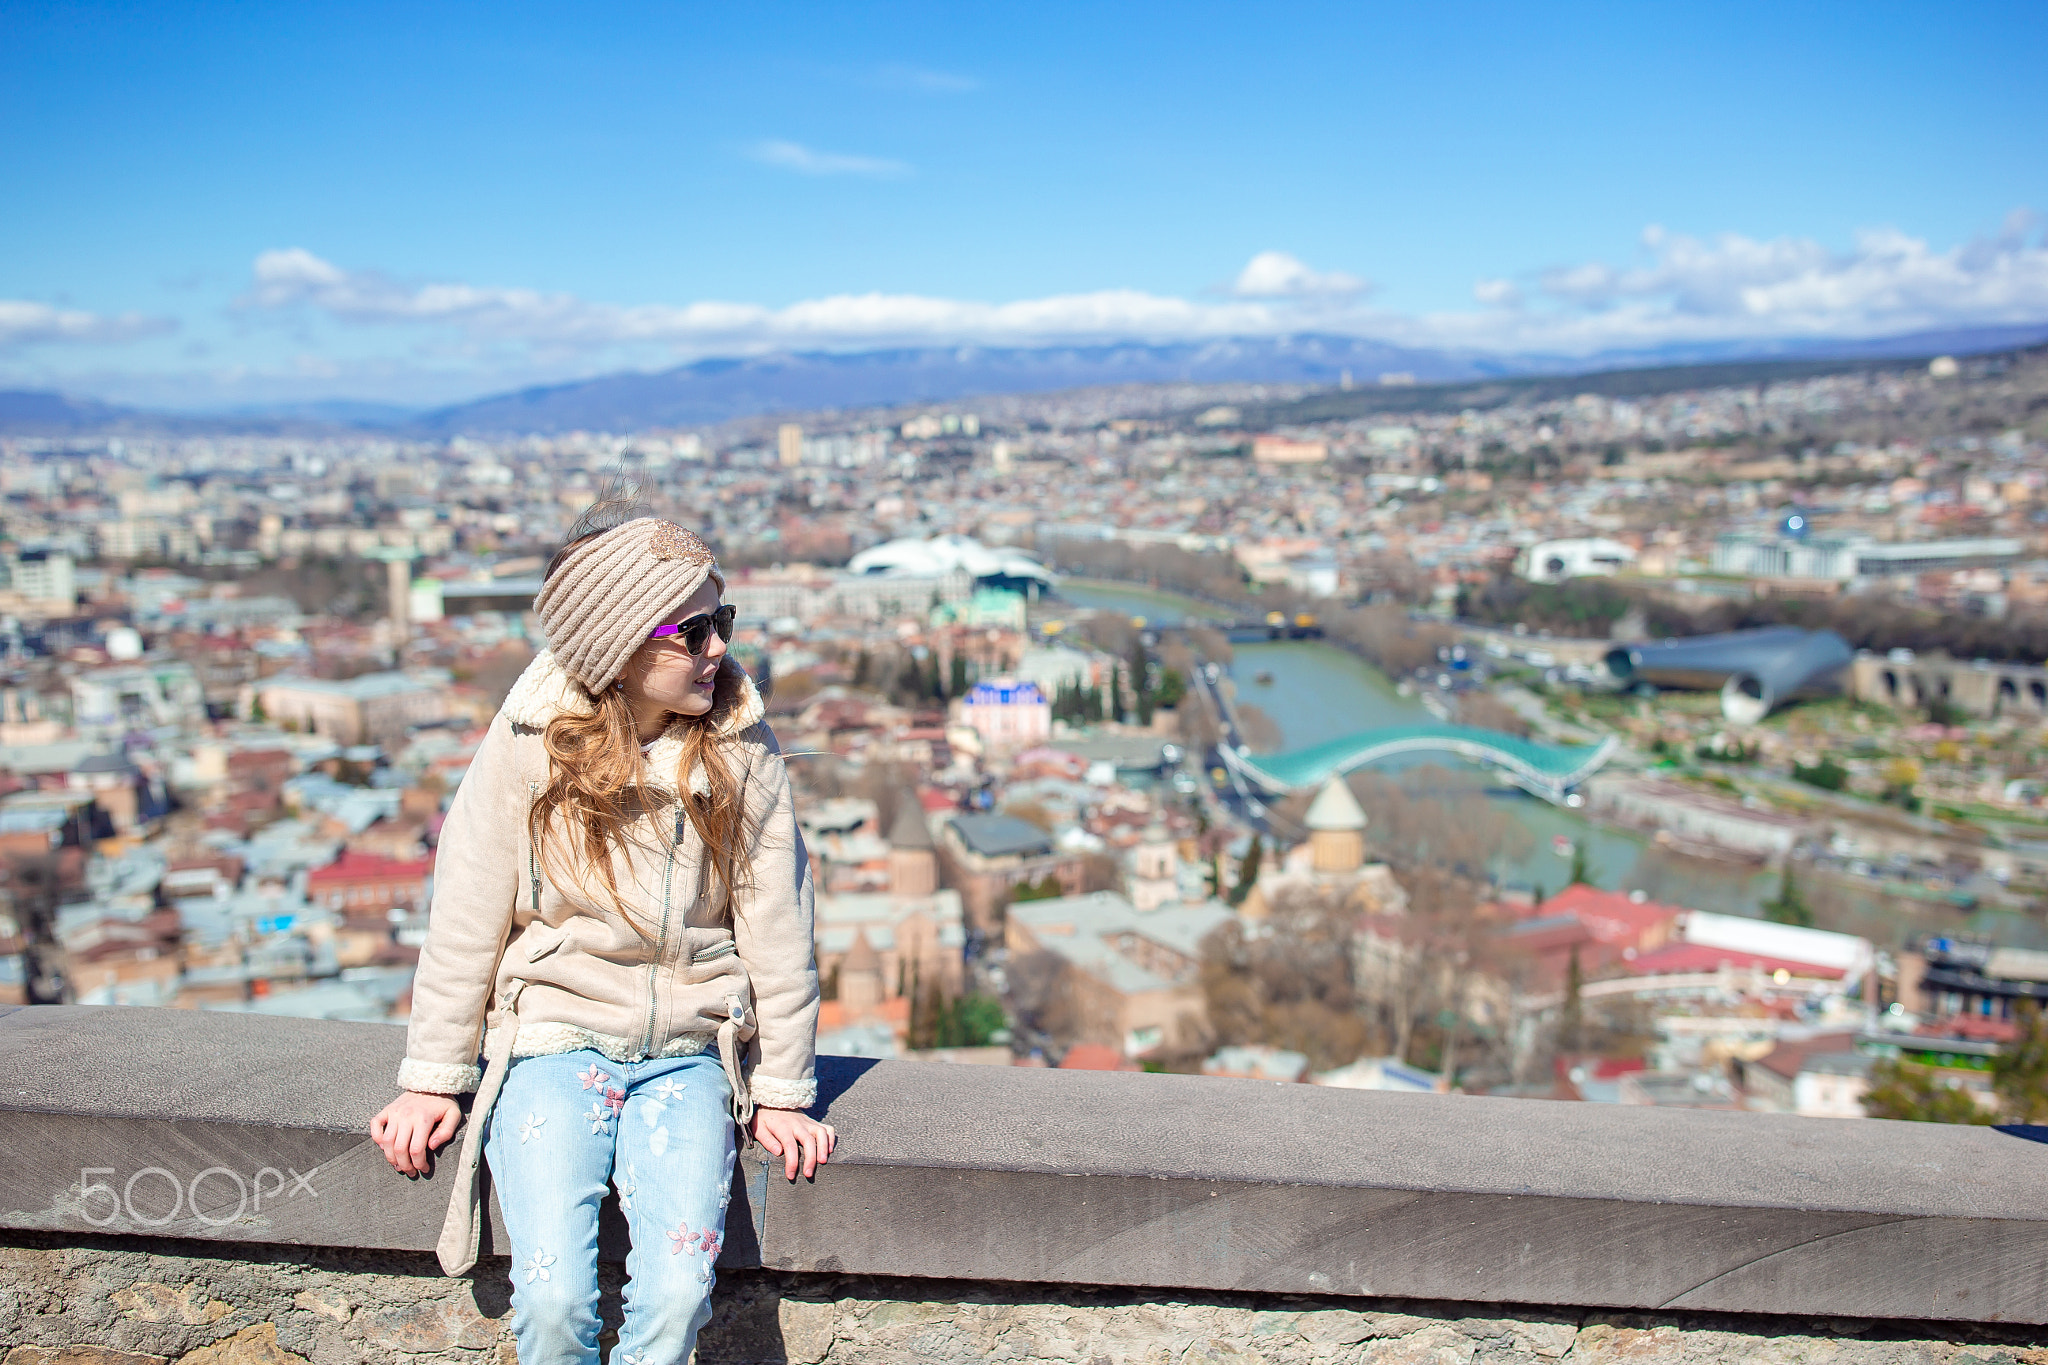 Tbilisi city panorama. Old city, new Summer Rike park, river Kura, the European Square and the...